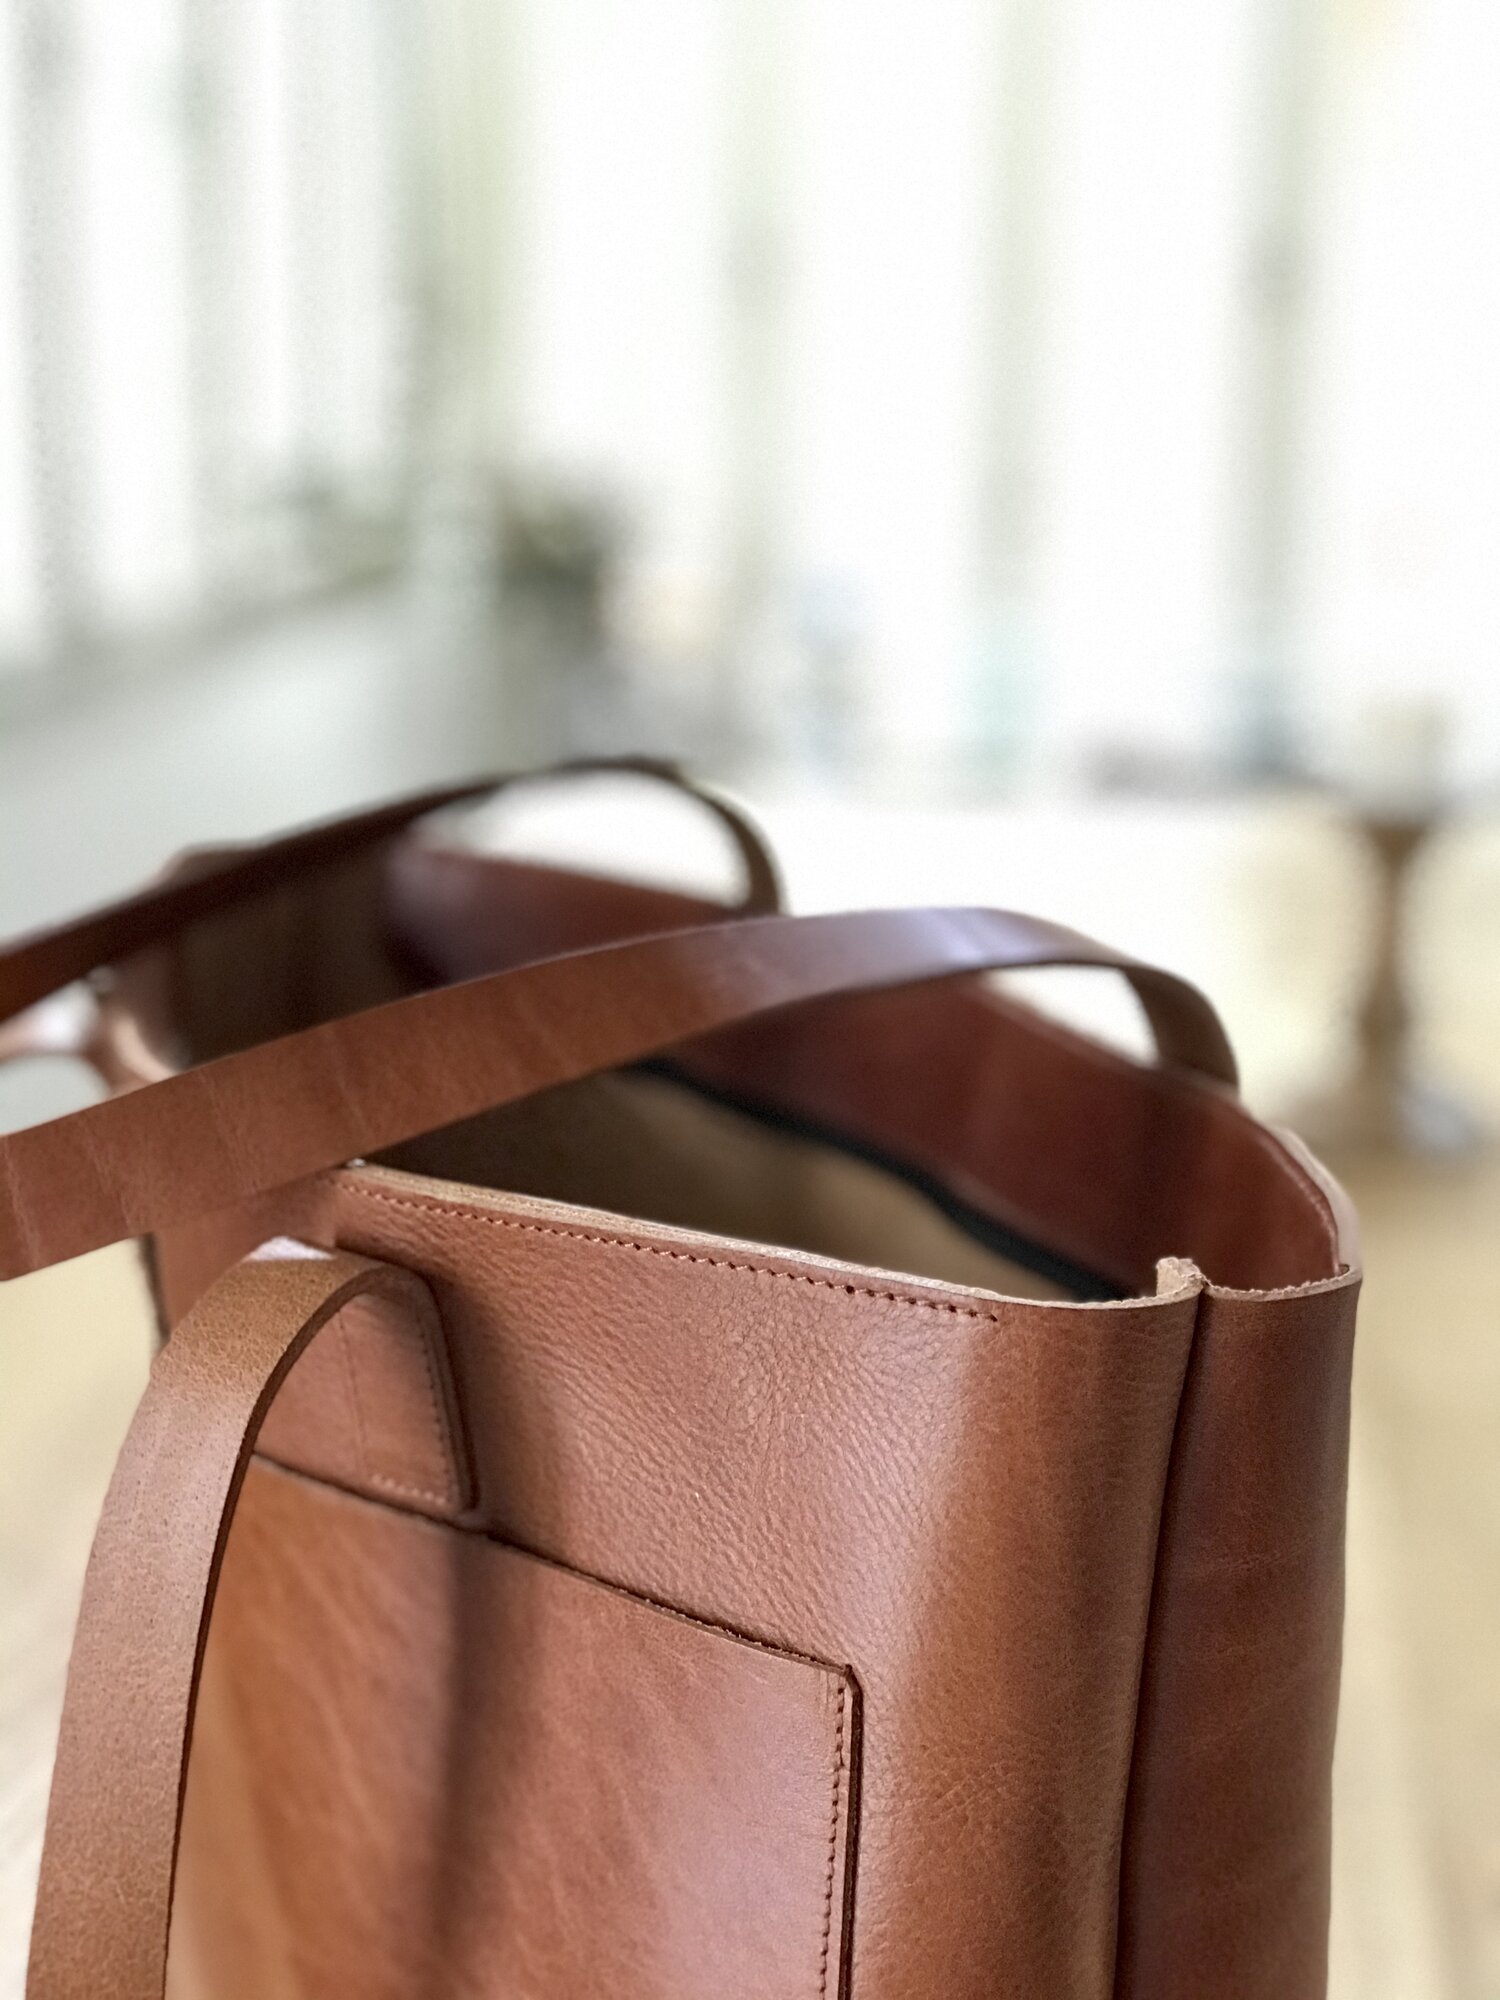 Brown Leather Tote Brown Leather Bag Large Brown Tote 